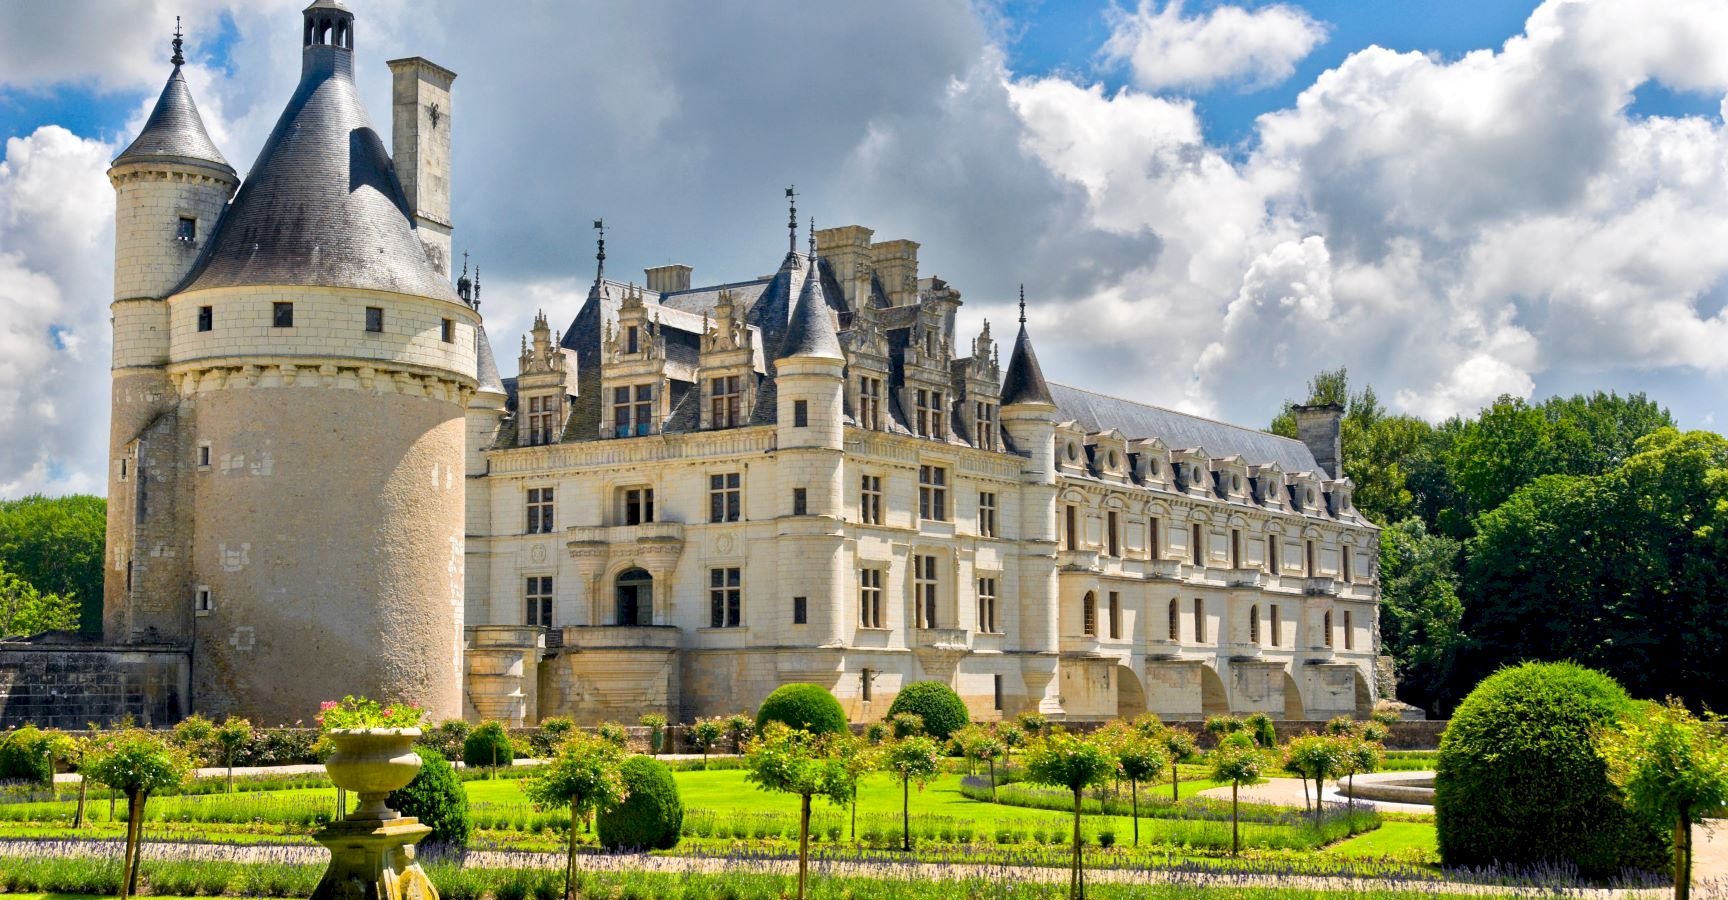 Ophorus Tours - Loire Valley Castles Private day tour from Paris by train